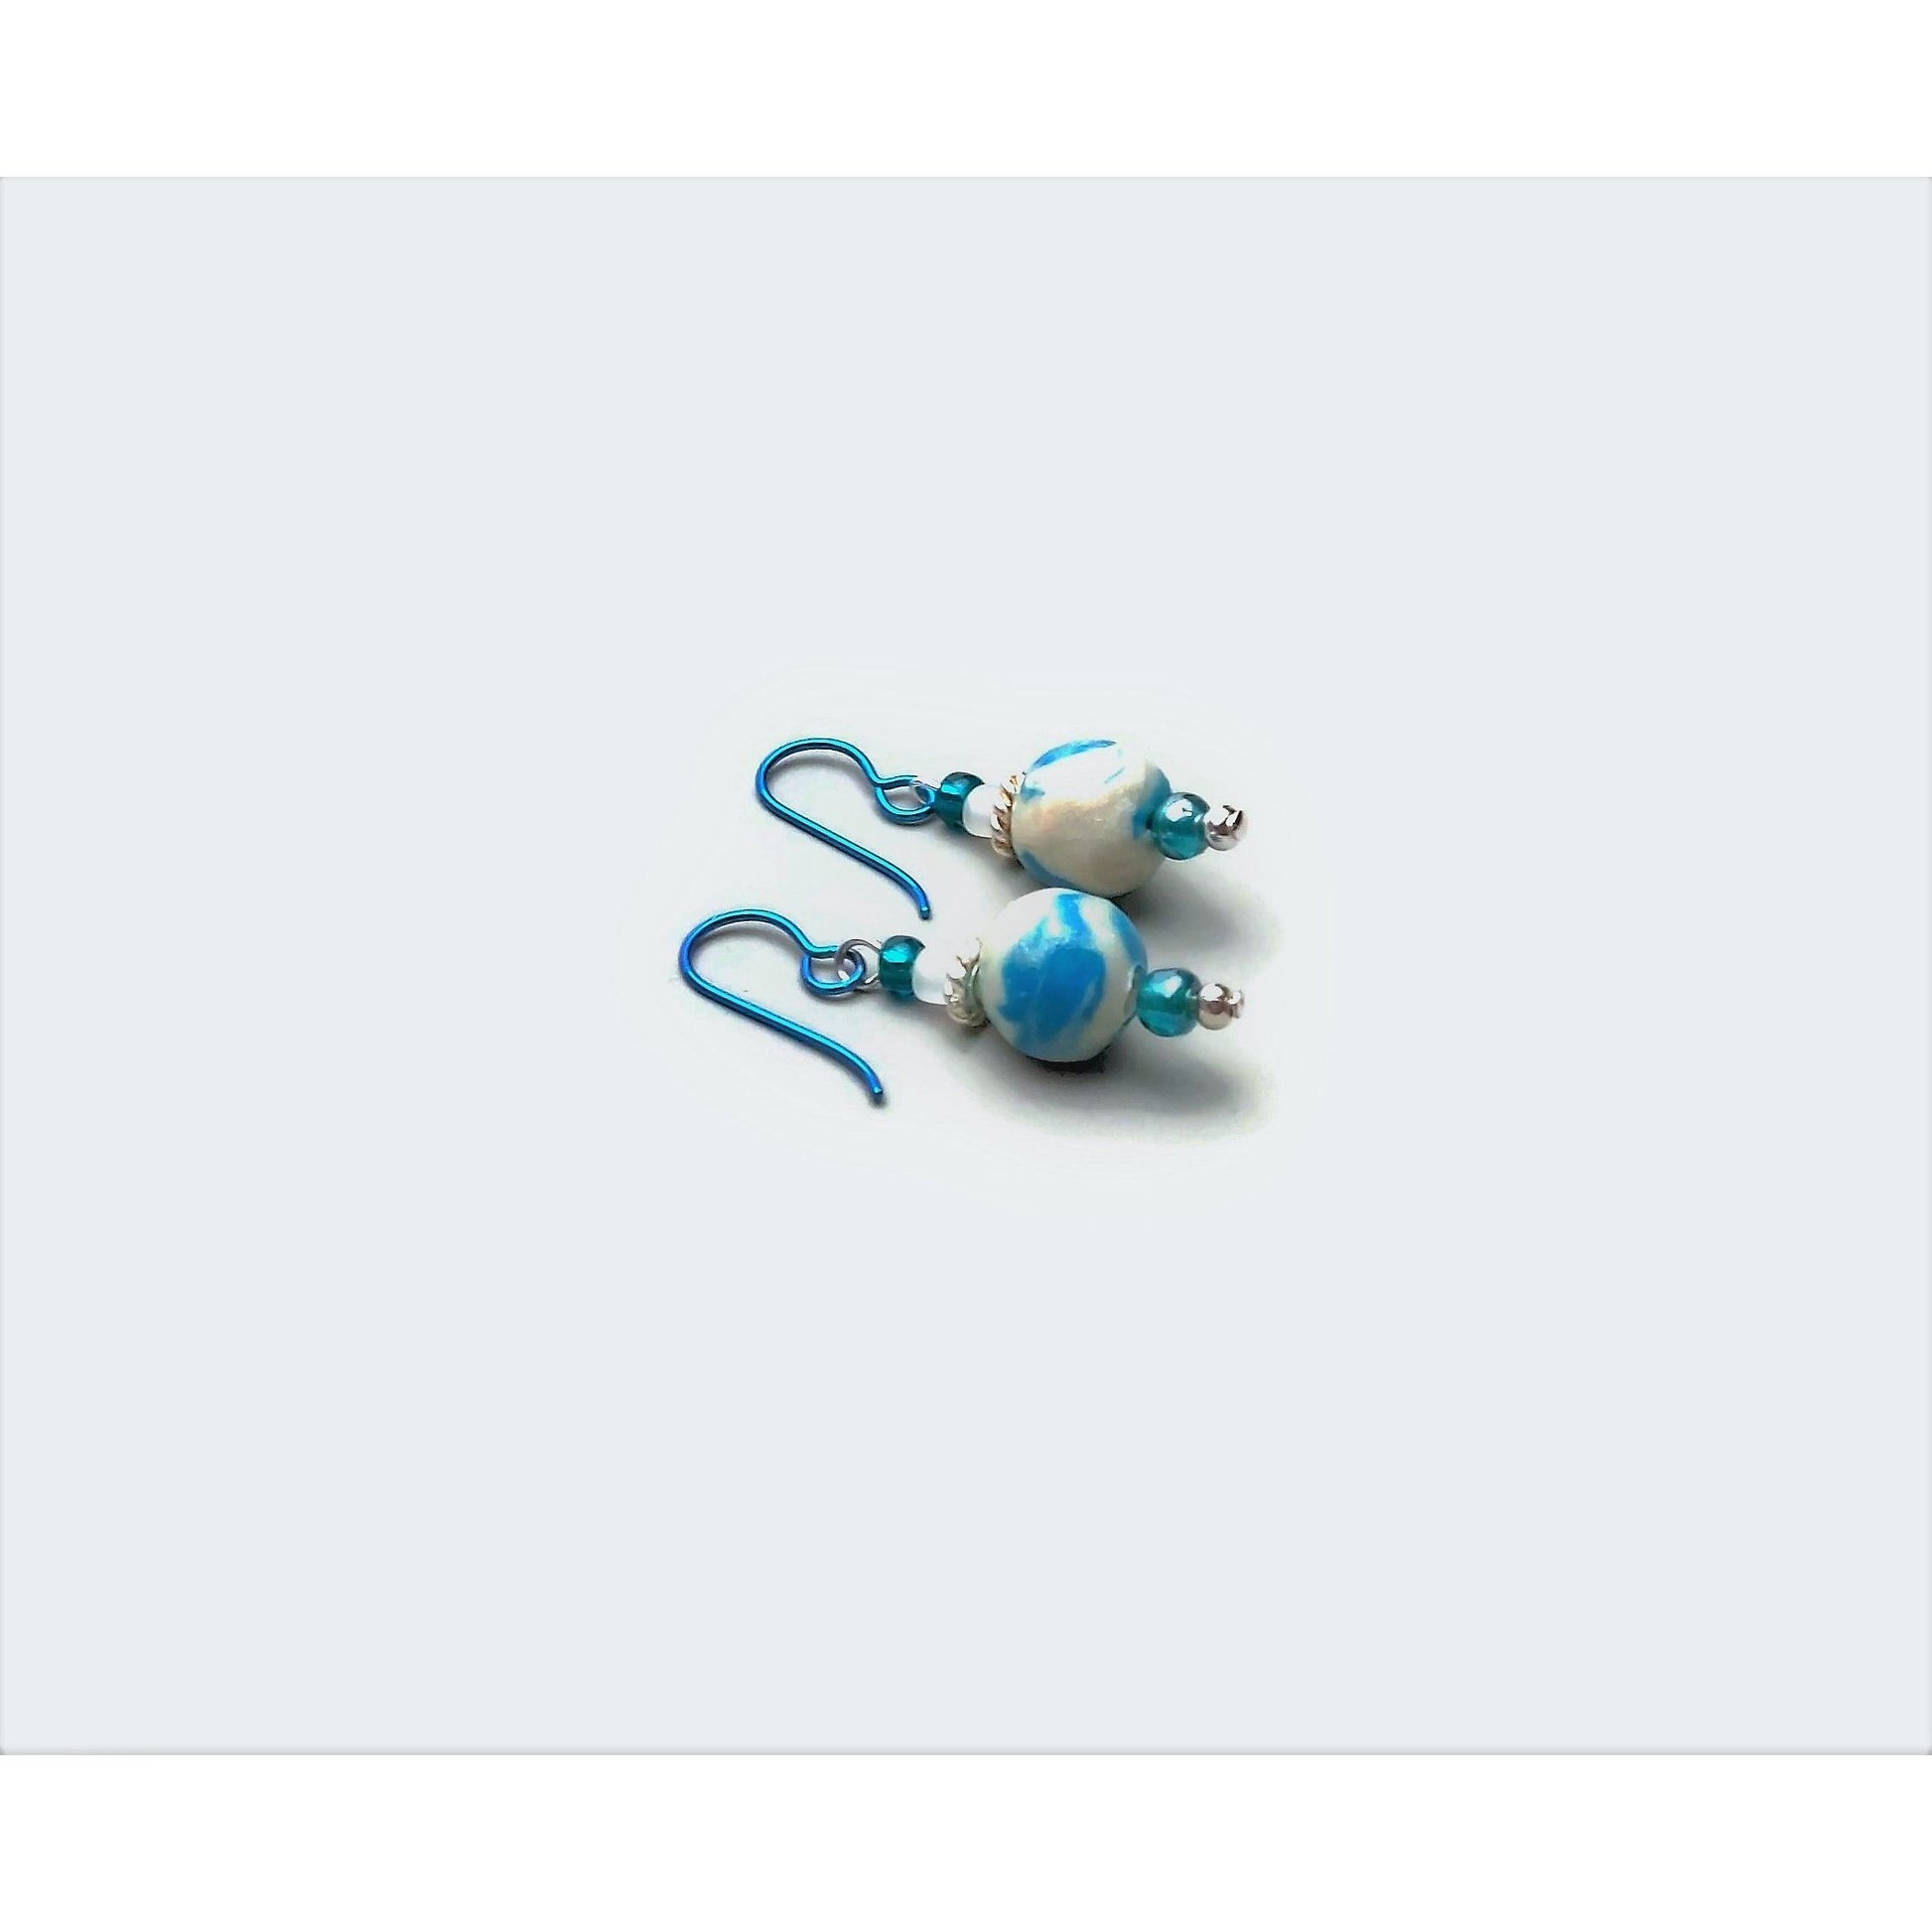 Polymer clay marbled drop earrings with teal niobium ear wires on white background